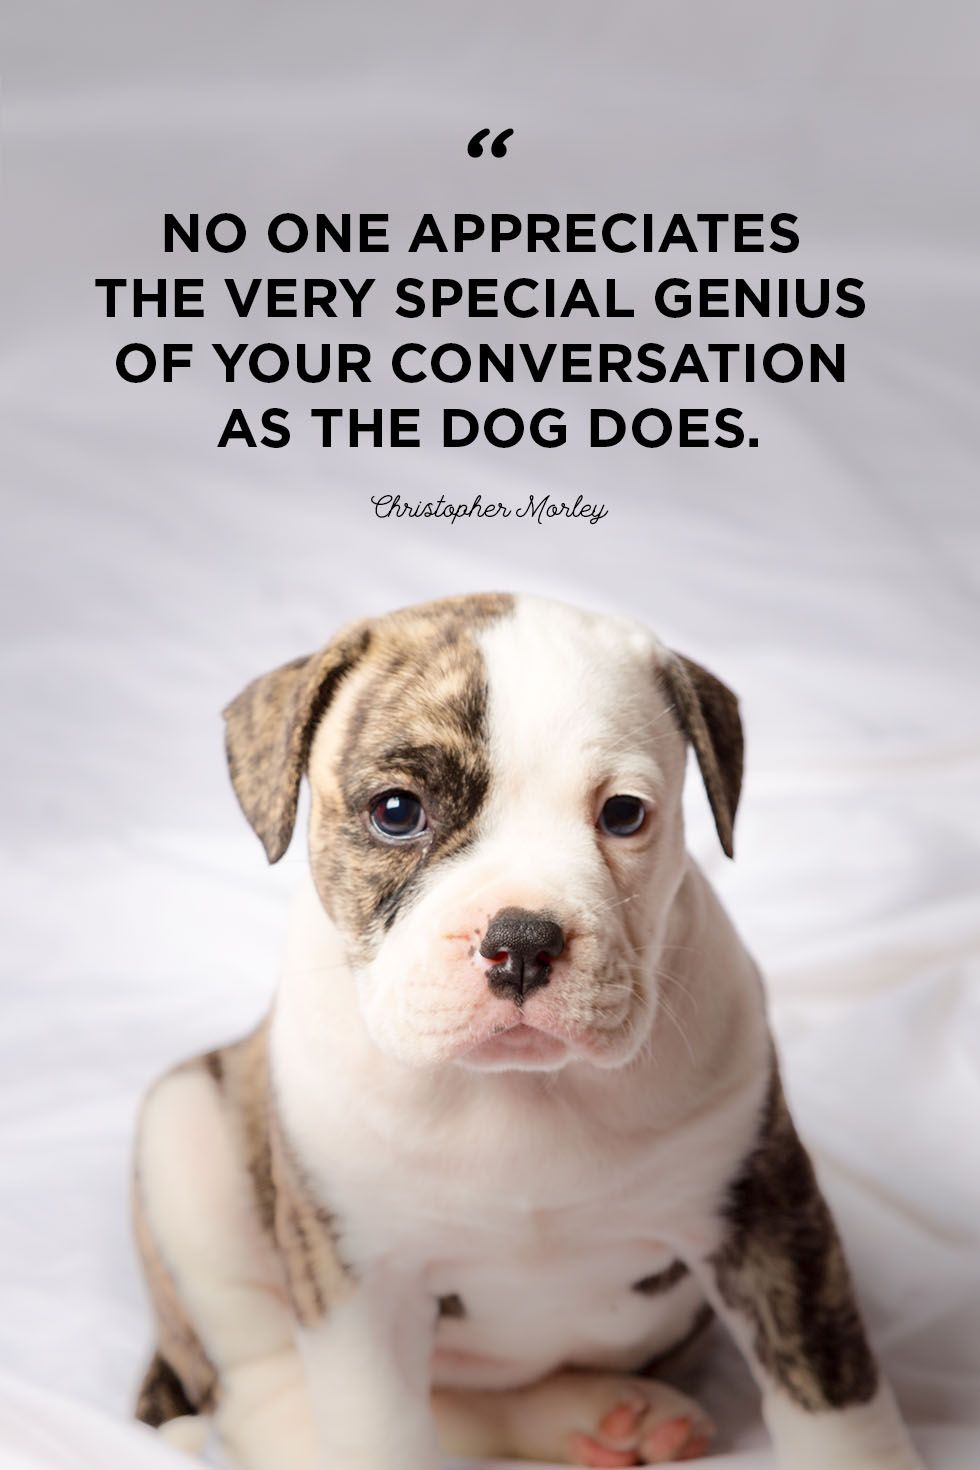 40 Best Dog Quotes - Cute, Short Quotes About Dogs